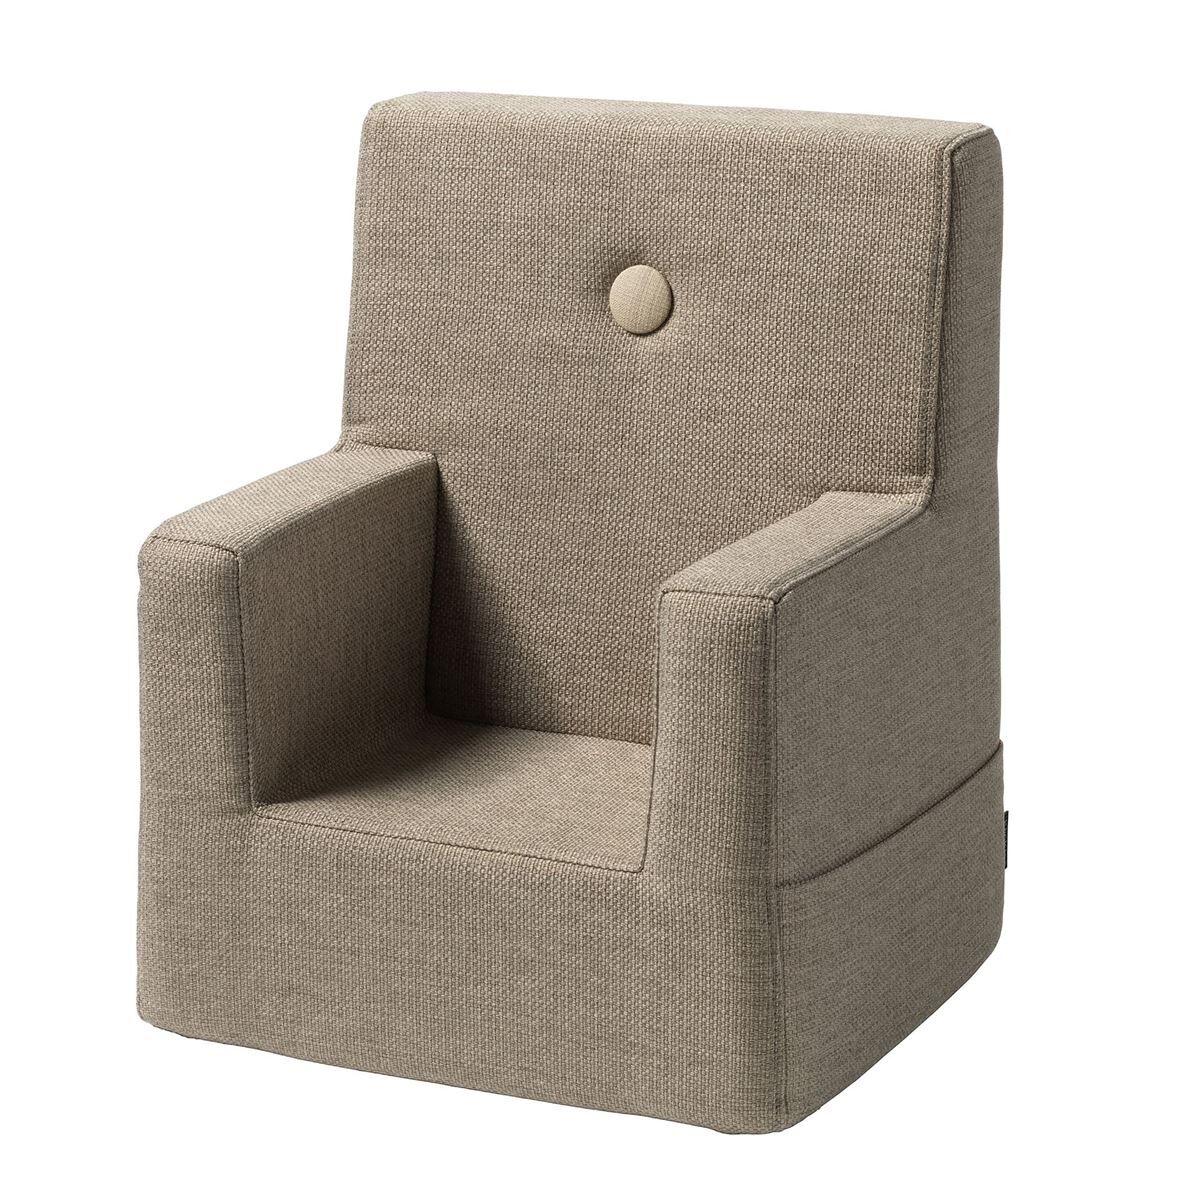 byKlipKlap Kids Chair - Beige with sand buttons